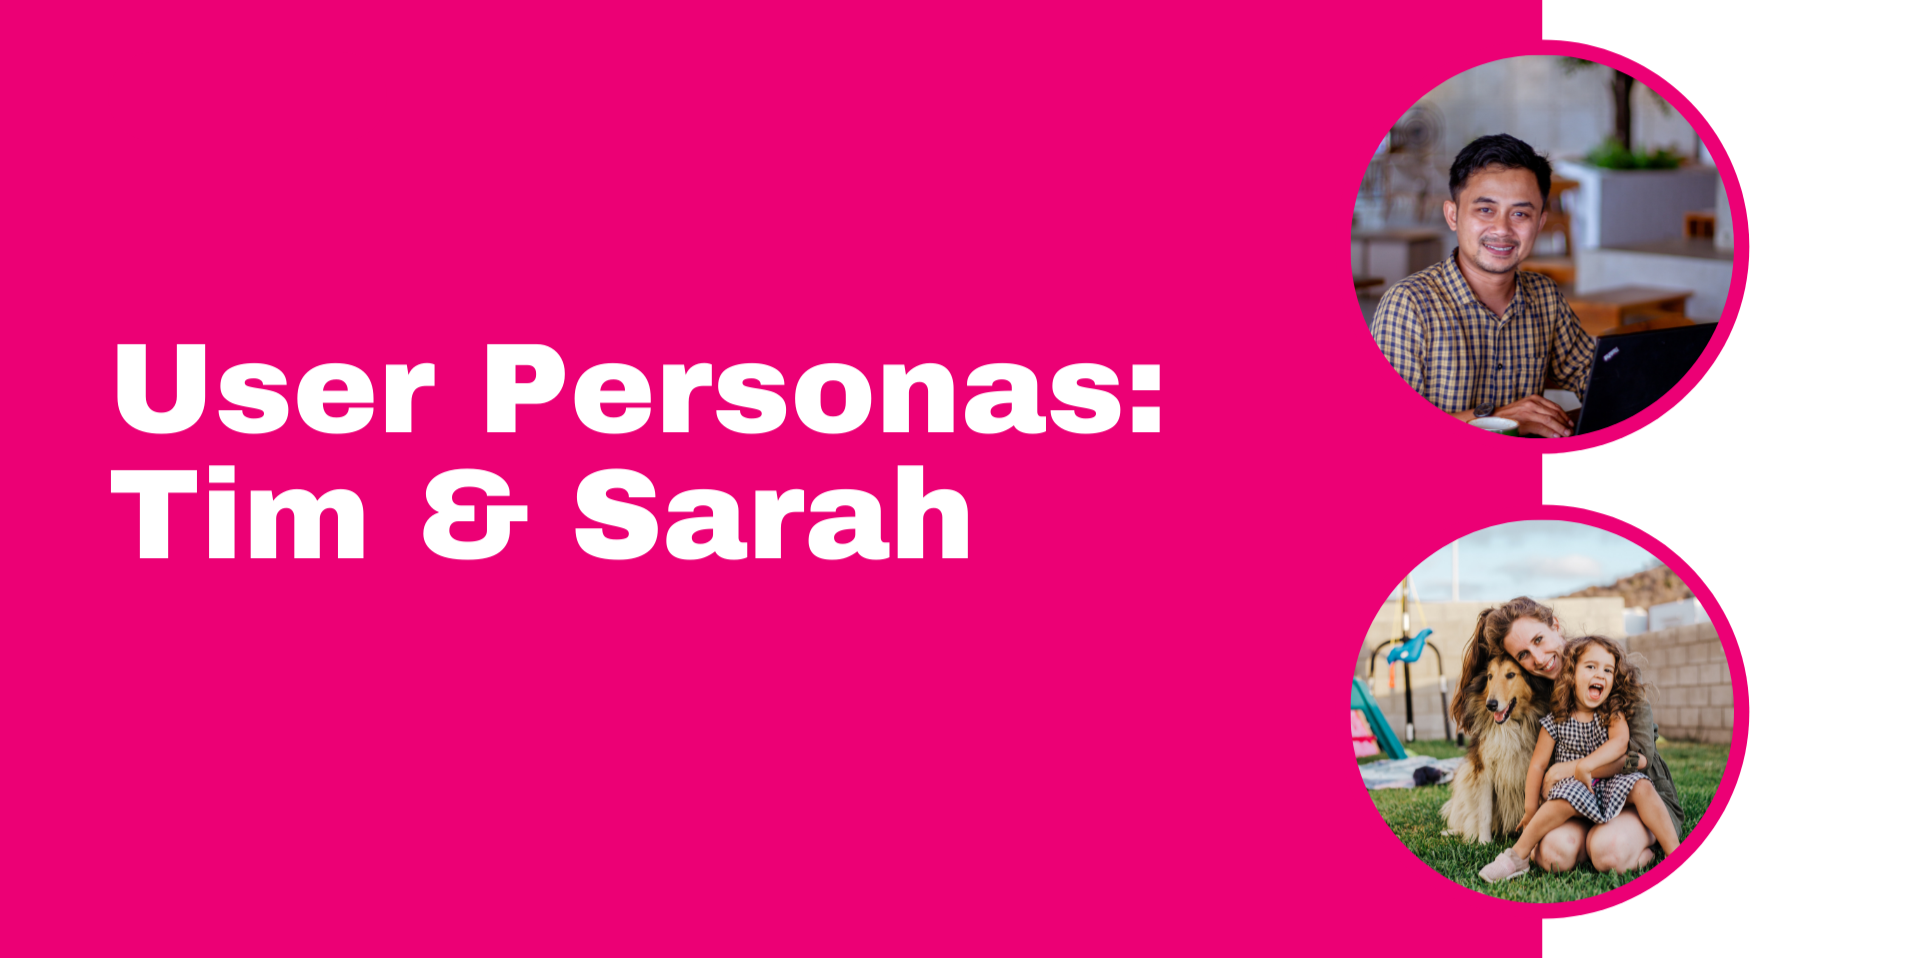 TMobile User Personas Cover.png